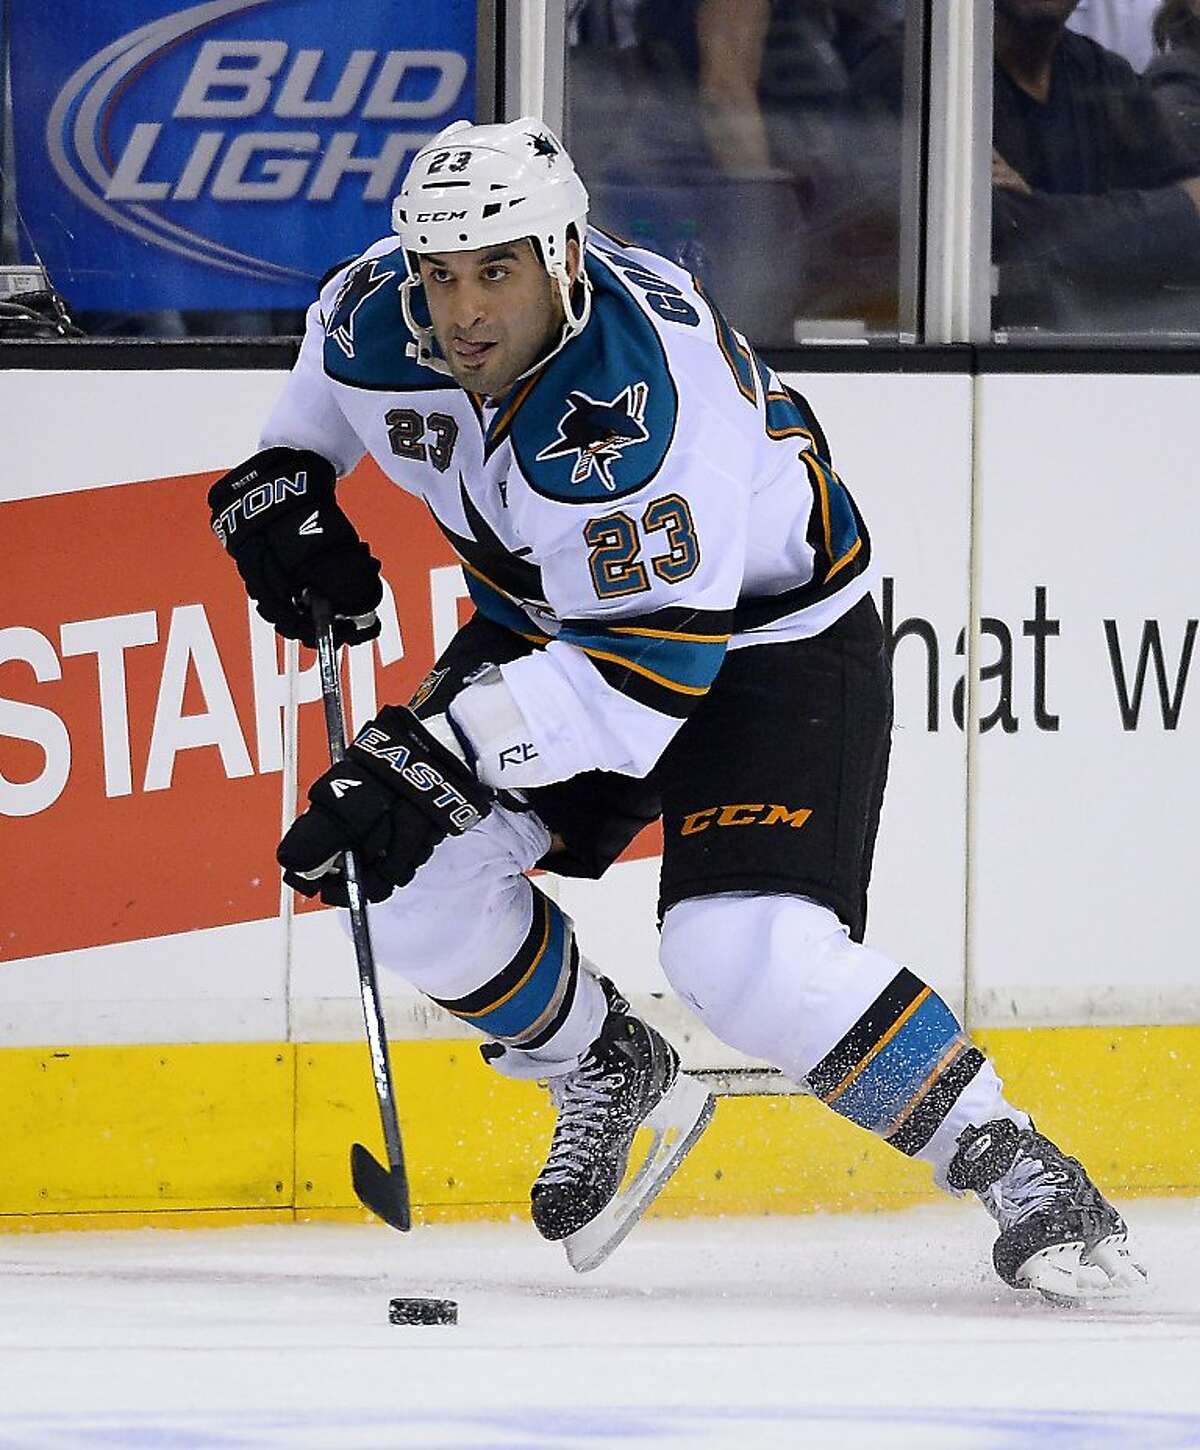 San Jose Sharks center Scott Gomez skates with the puck during the third period in Game 2 of their second-round NHL hockey Stanley Cup playoff series against the Los Angeles Kings, Thursday, May 16, 2013, in Los Angeles. (AP Photo/Mark J. Terrill)